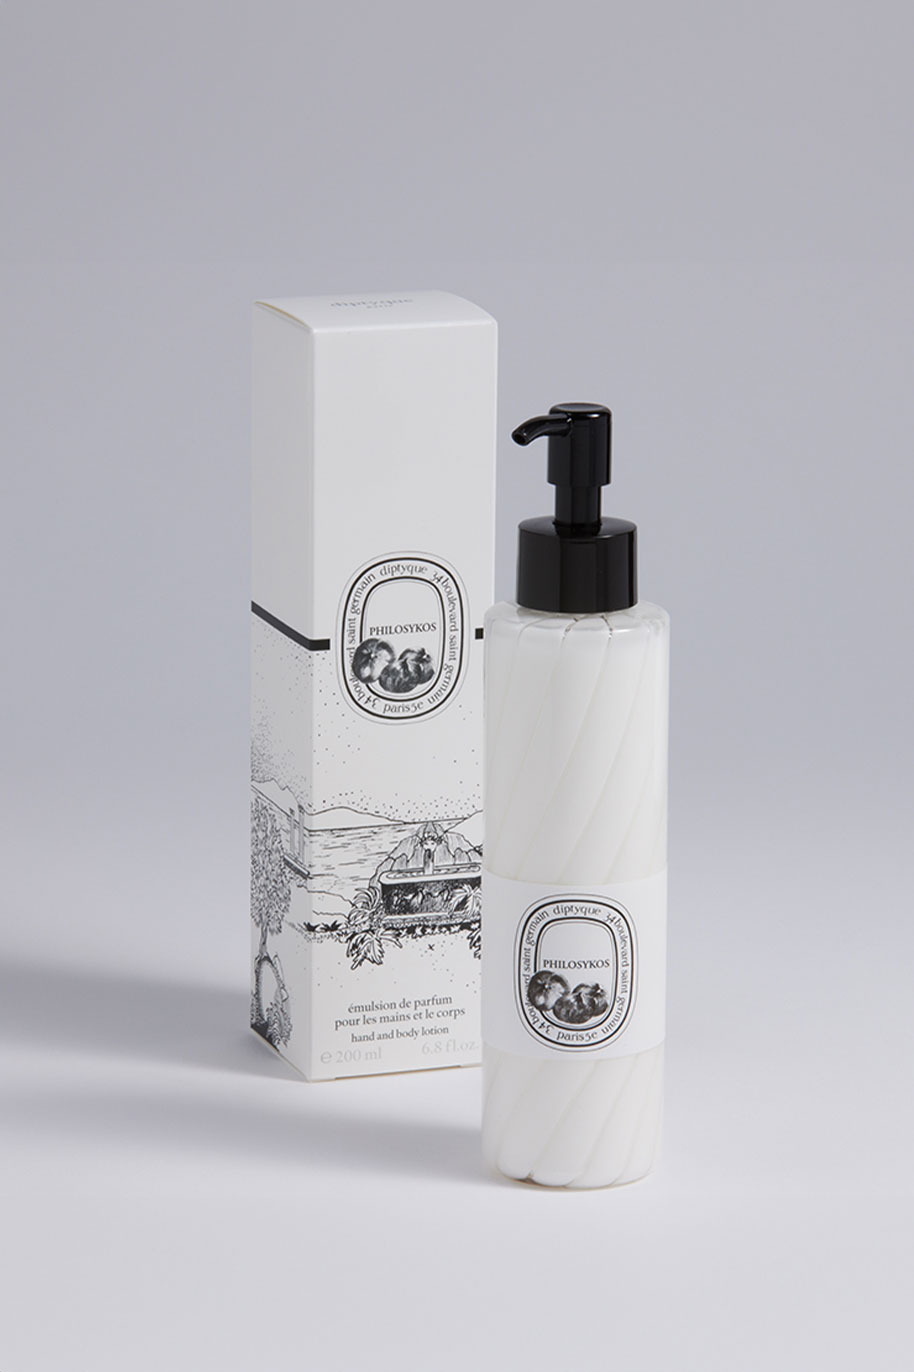 Diptyque for The Ritz-Carlton Philosykos Hand and Body Lotion Image